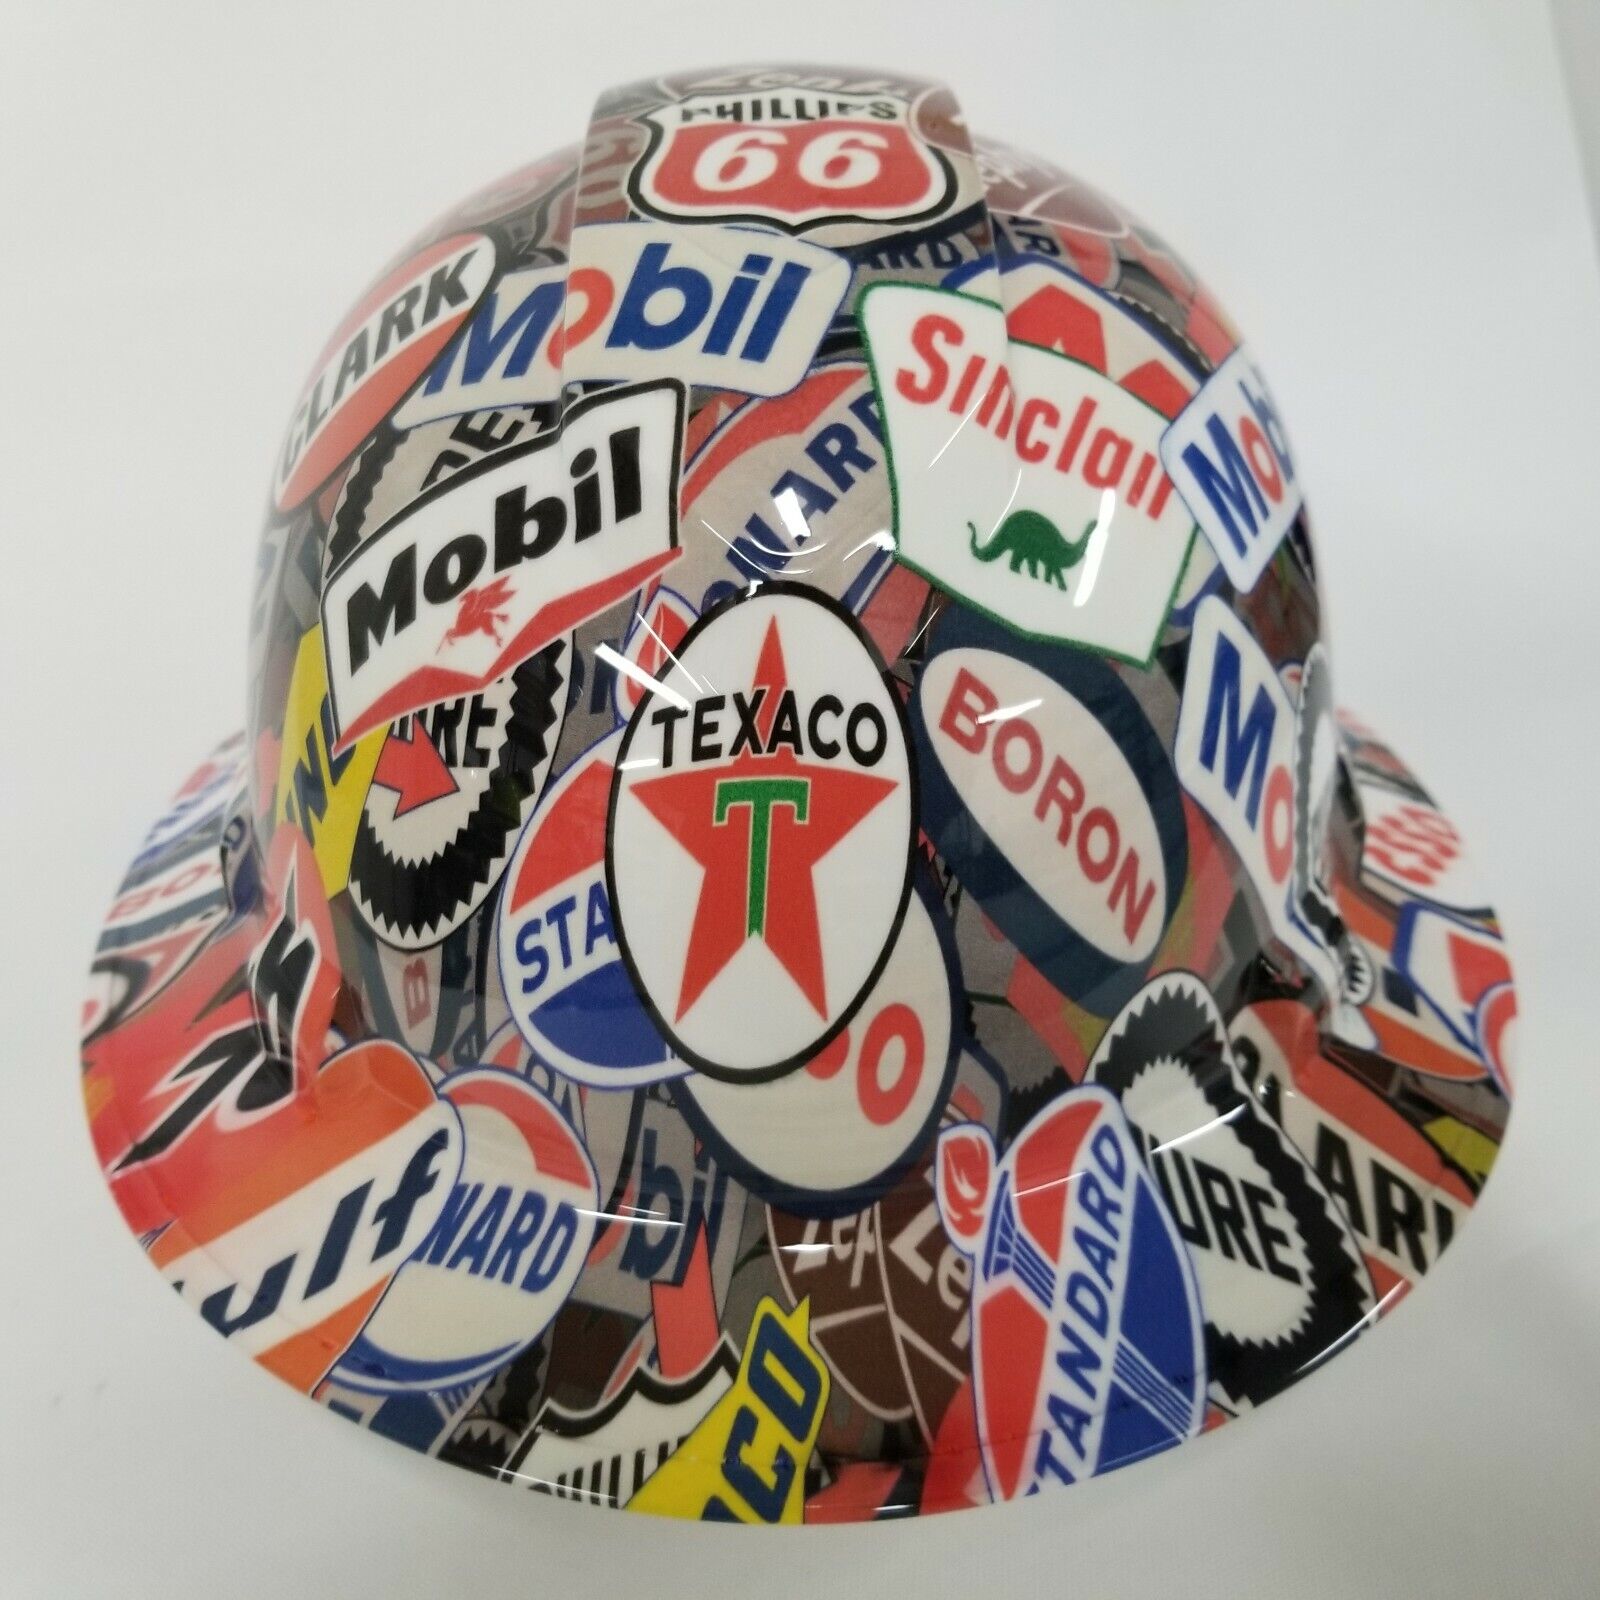 NEW FULL BRIM Hard Hat custom hydro dipped in FULL COLOR OIL AND GAS SIGNS 